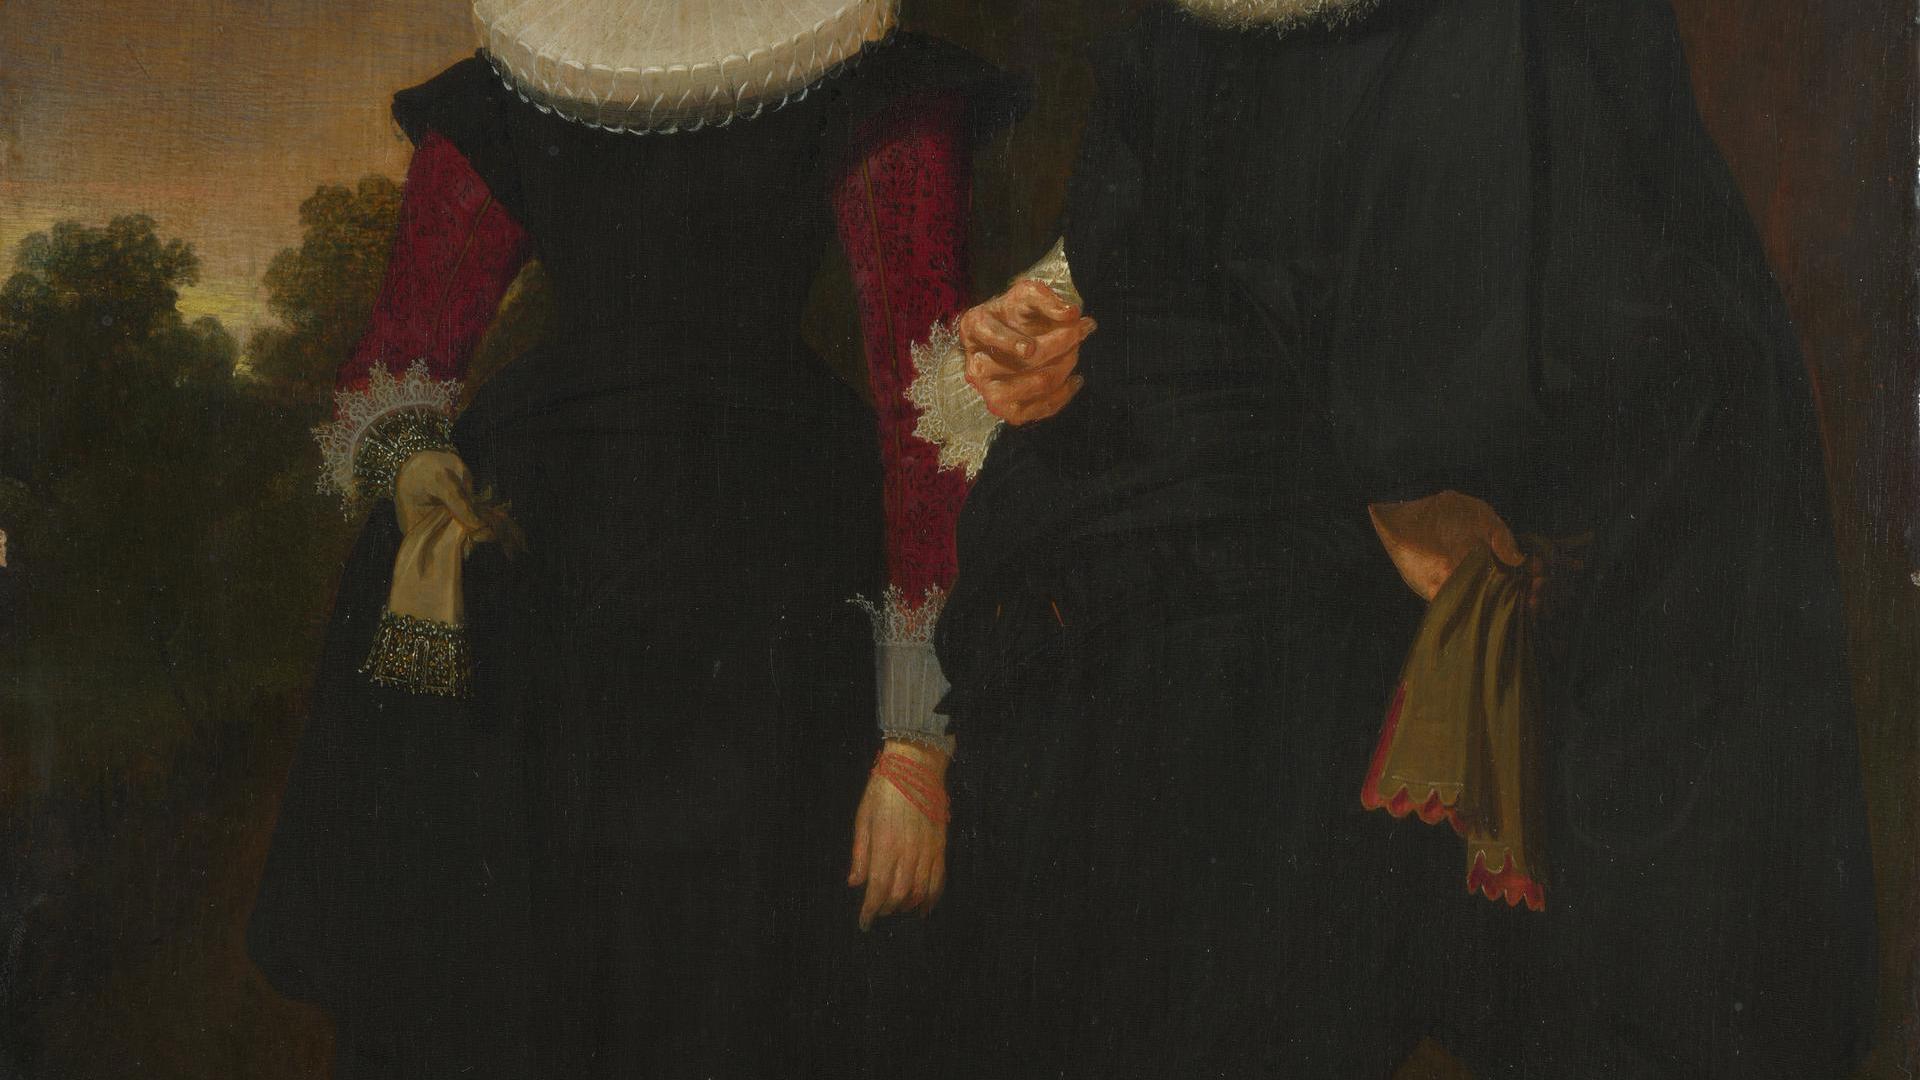 Portrait of a Man and a Woman by Dutch